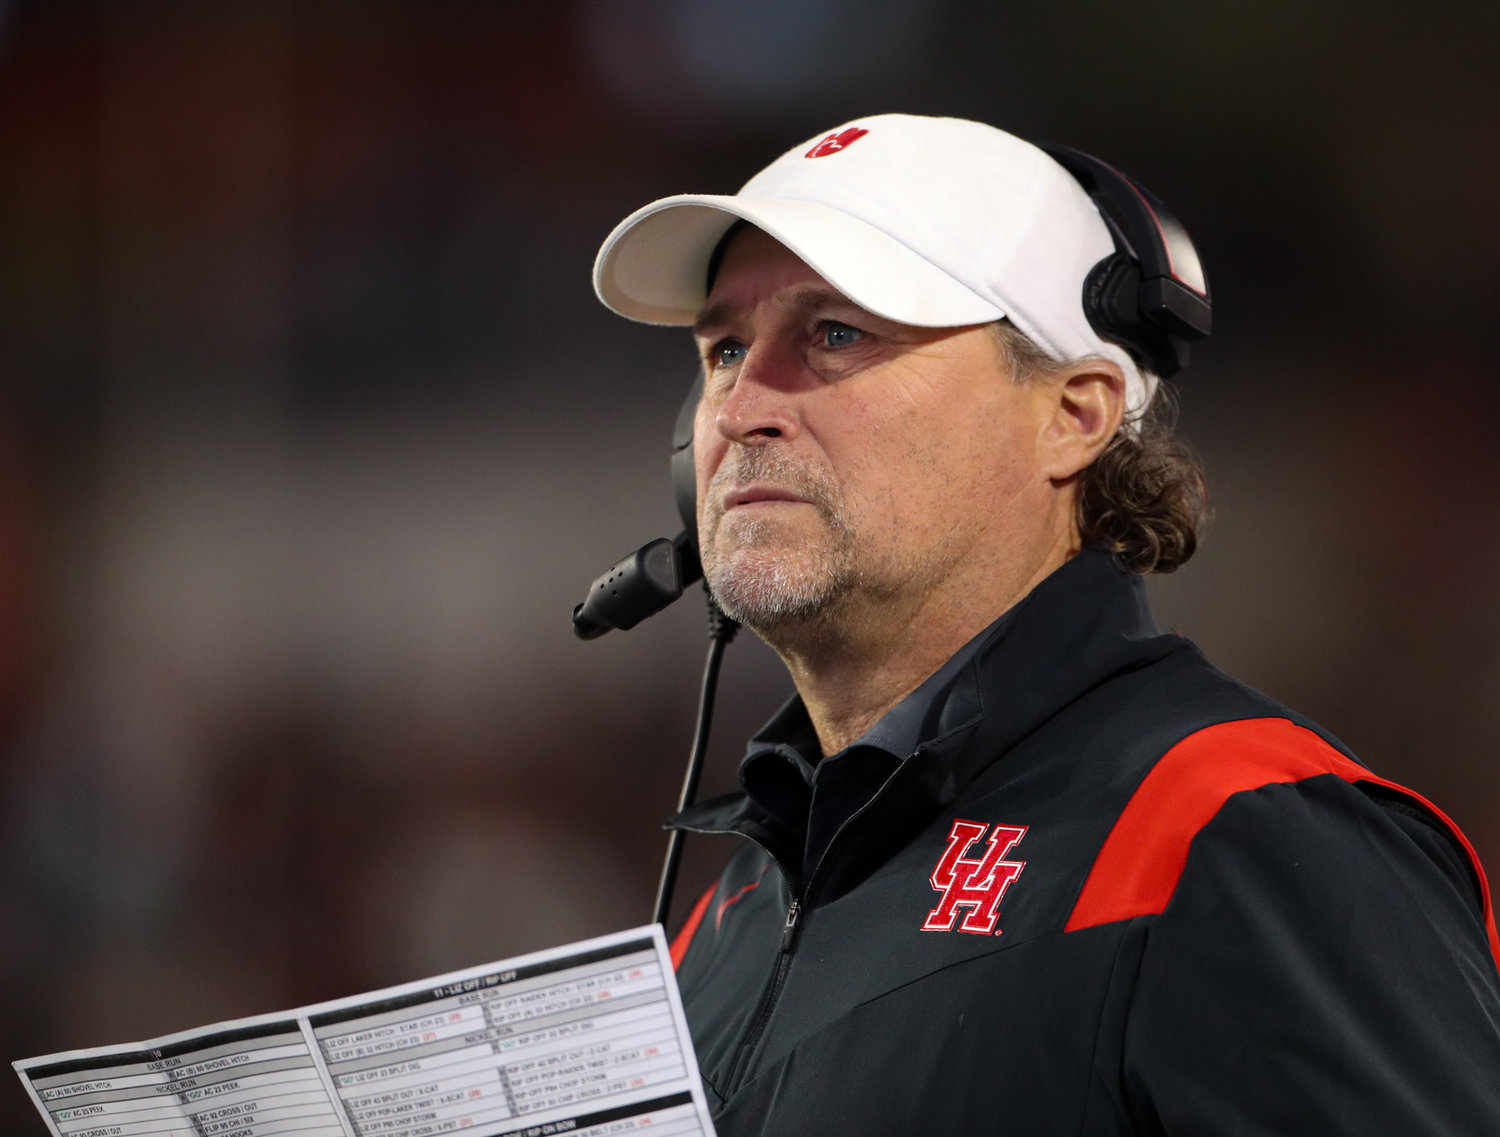 Houston Cougars head coach Dana Holgerson during an NCAA football game between Houston and SMU on October 30, 2021 in Houston, Texas.